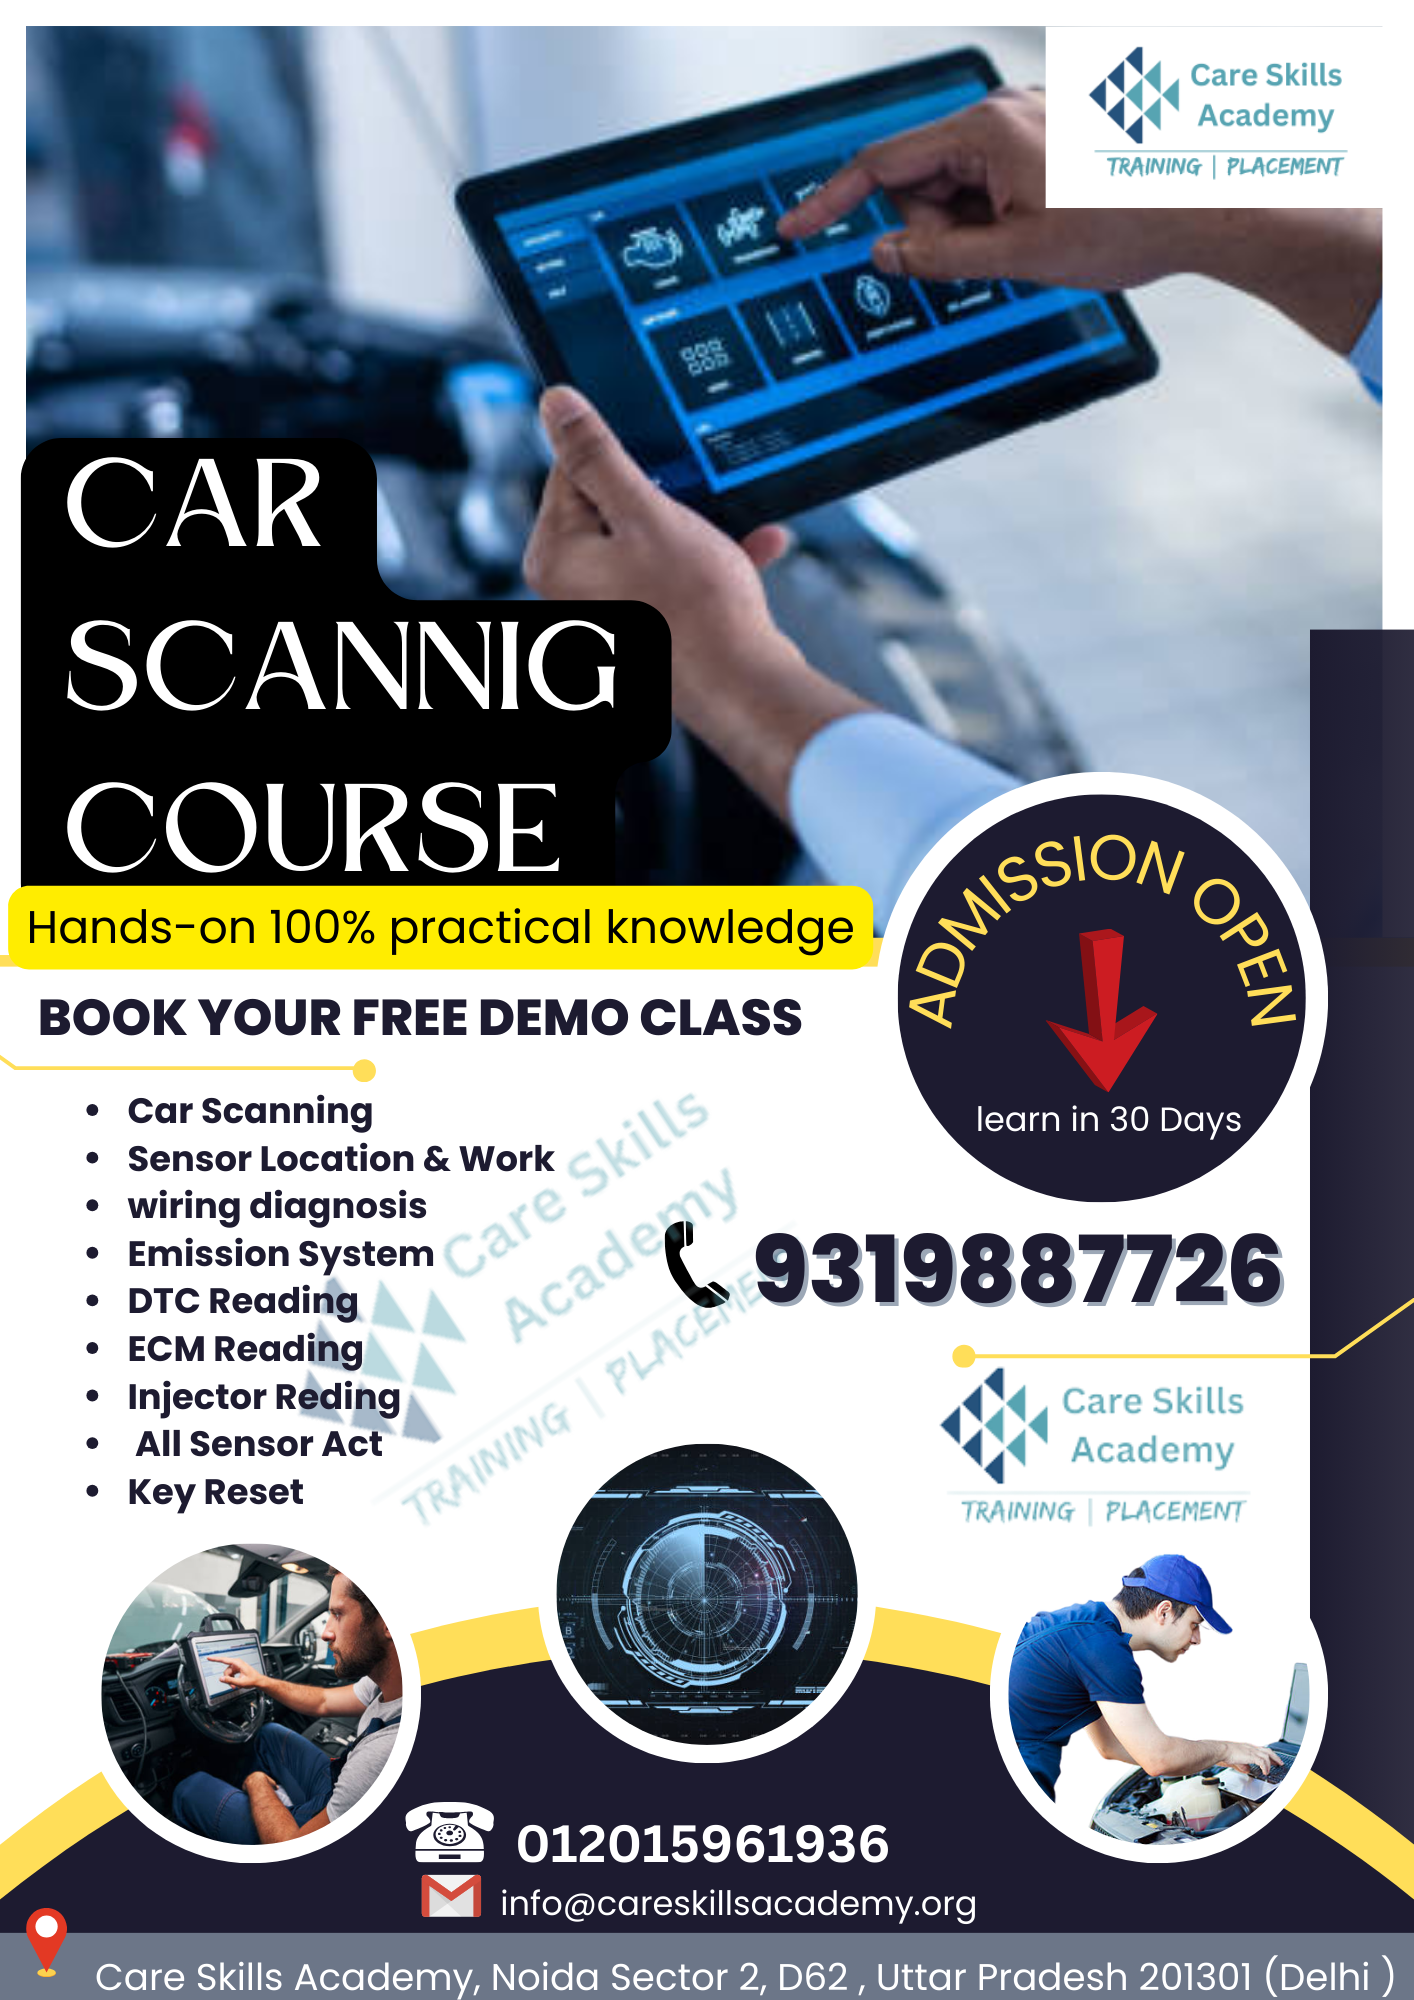 Become a Skilled Car Scanner Course with the Best Training at Care Skills Academy in Delhi